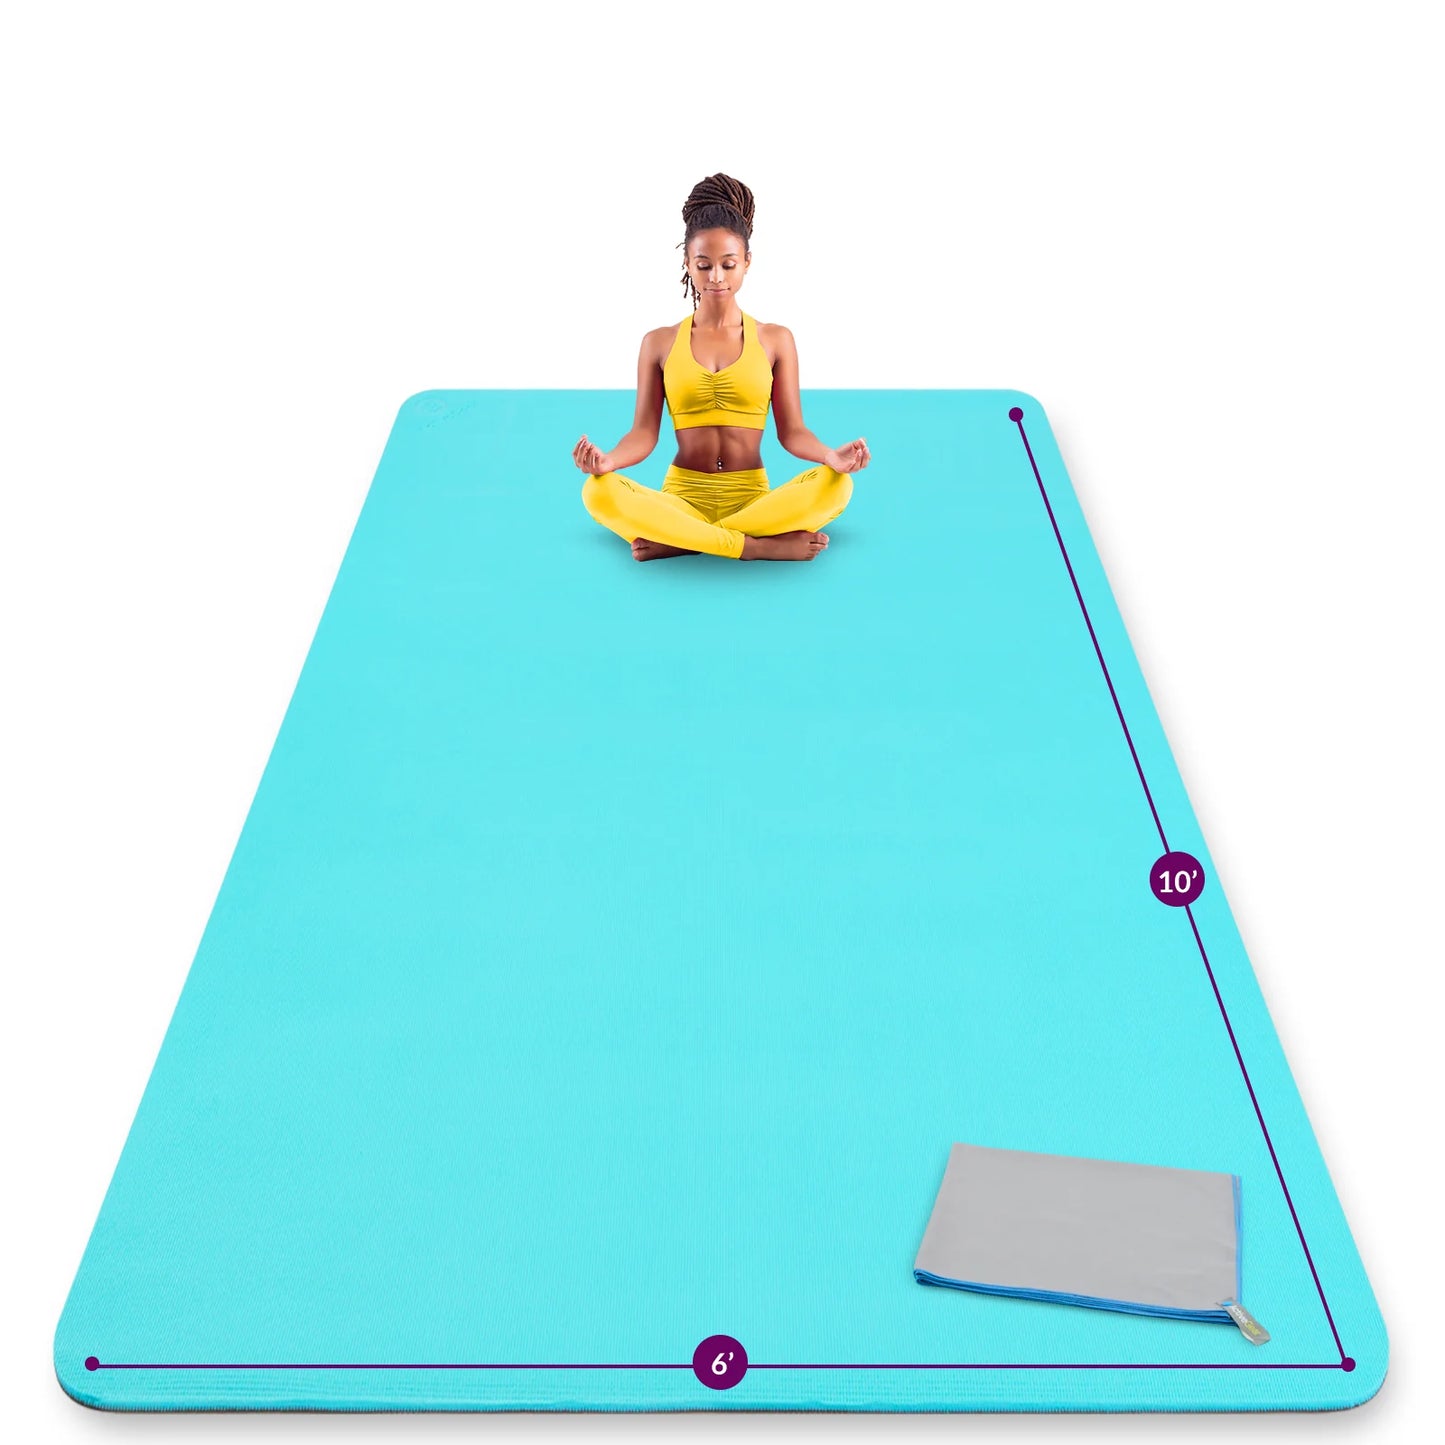 ActiveGear Giant Yoga Mats: Elevate Your Practice with Unmatched Comfort and Support